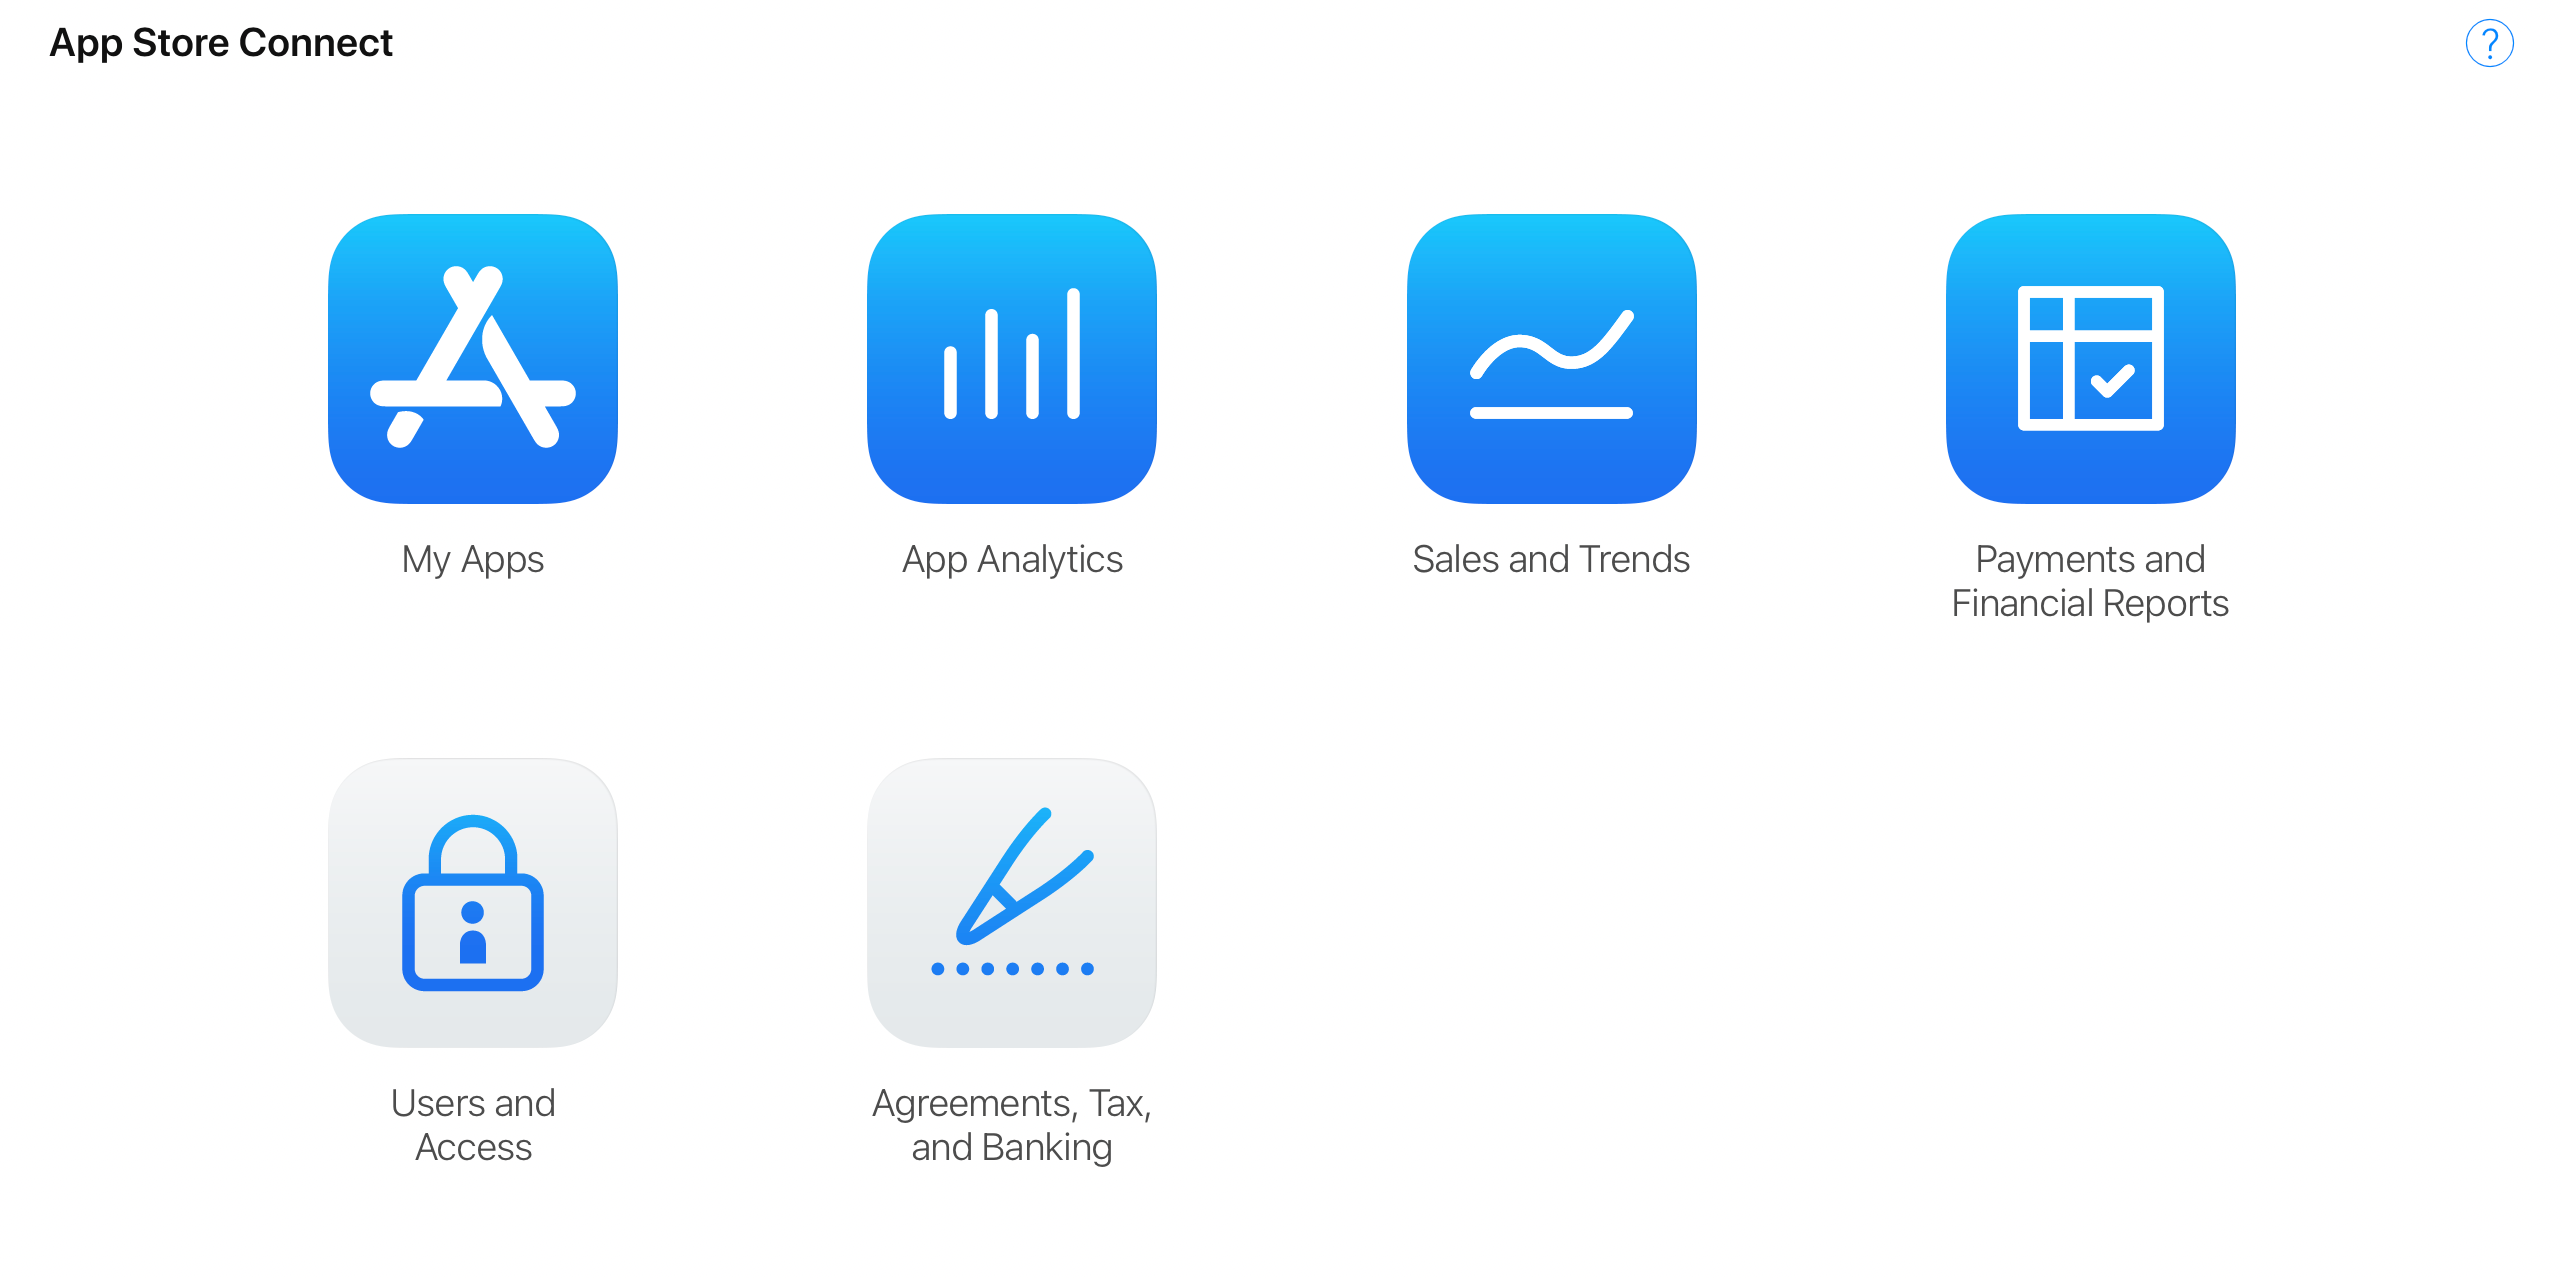 App Store Connect dashboard with "my apps", "app analytics", "sales and trends", "payments", "users and access", and "agreements, tax, and banking" menus